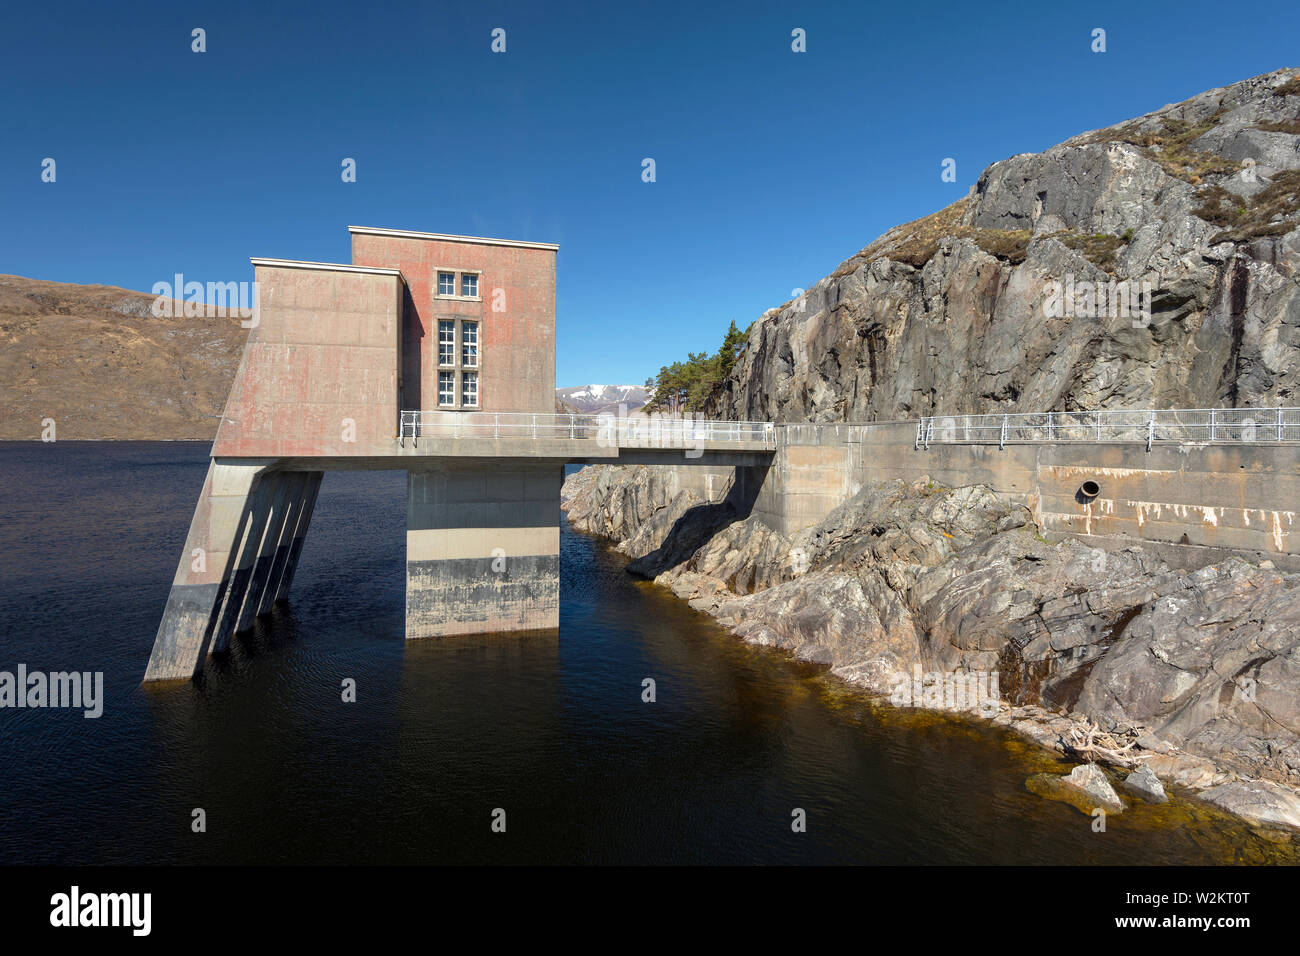 The intake tower at the Monar Dam at in Glen Strathfarrar, Highland Scotland.  The first double curvature arch dam built in Britain in 1963. Stock Photo